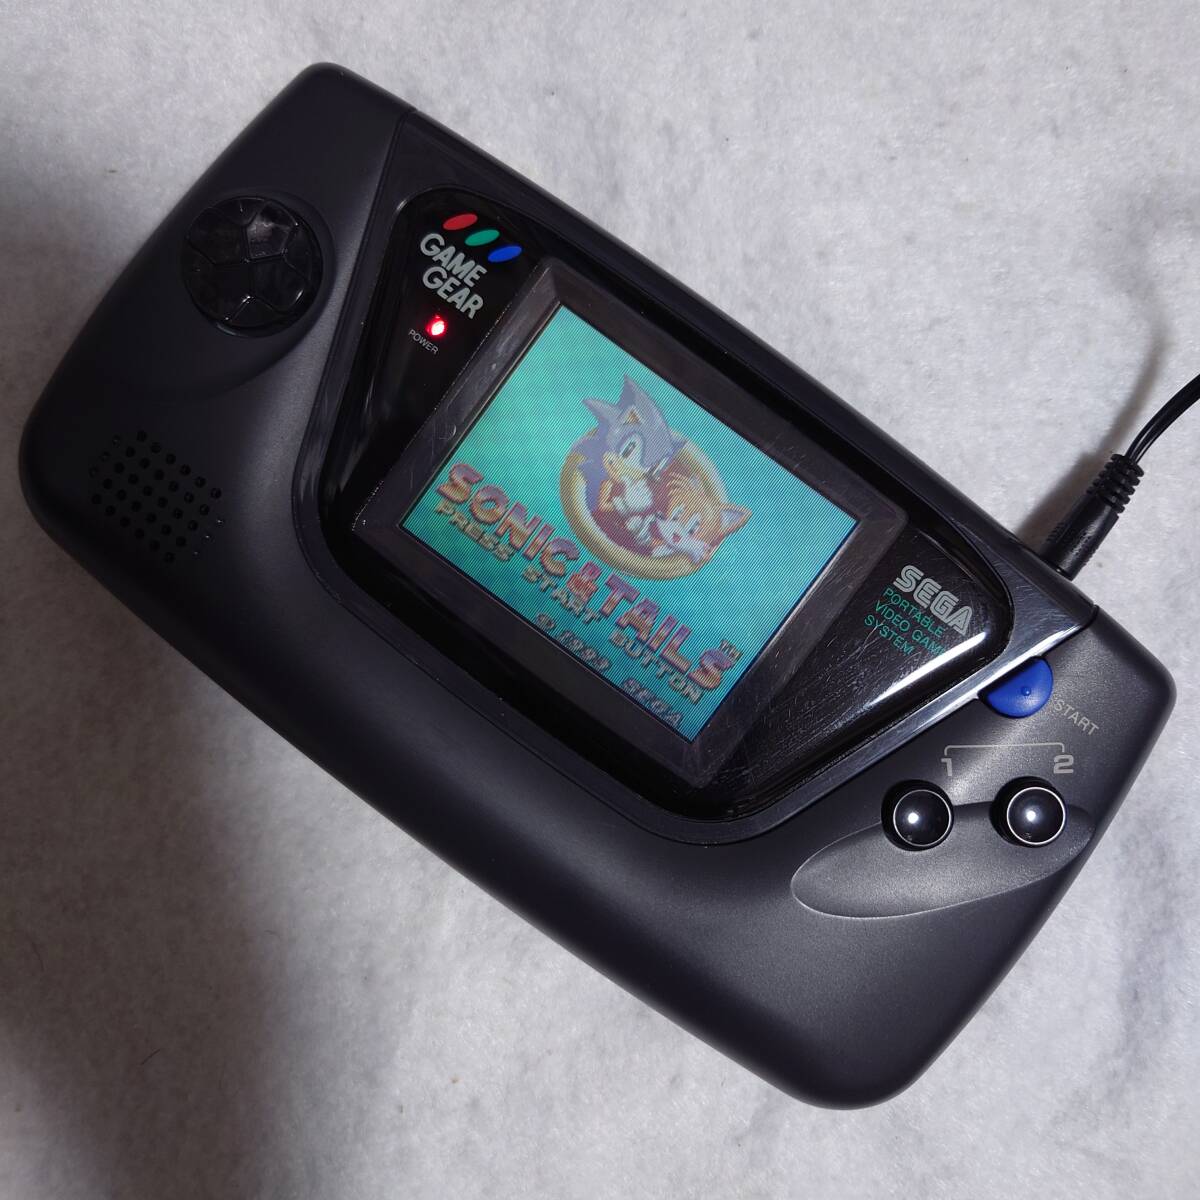  Game Gear +1 Sonic & tail s